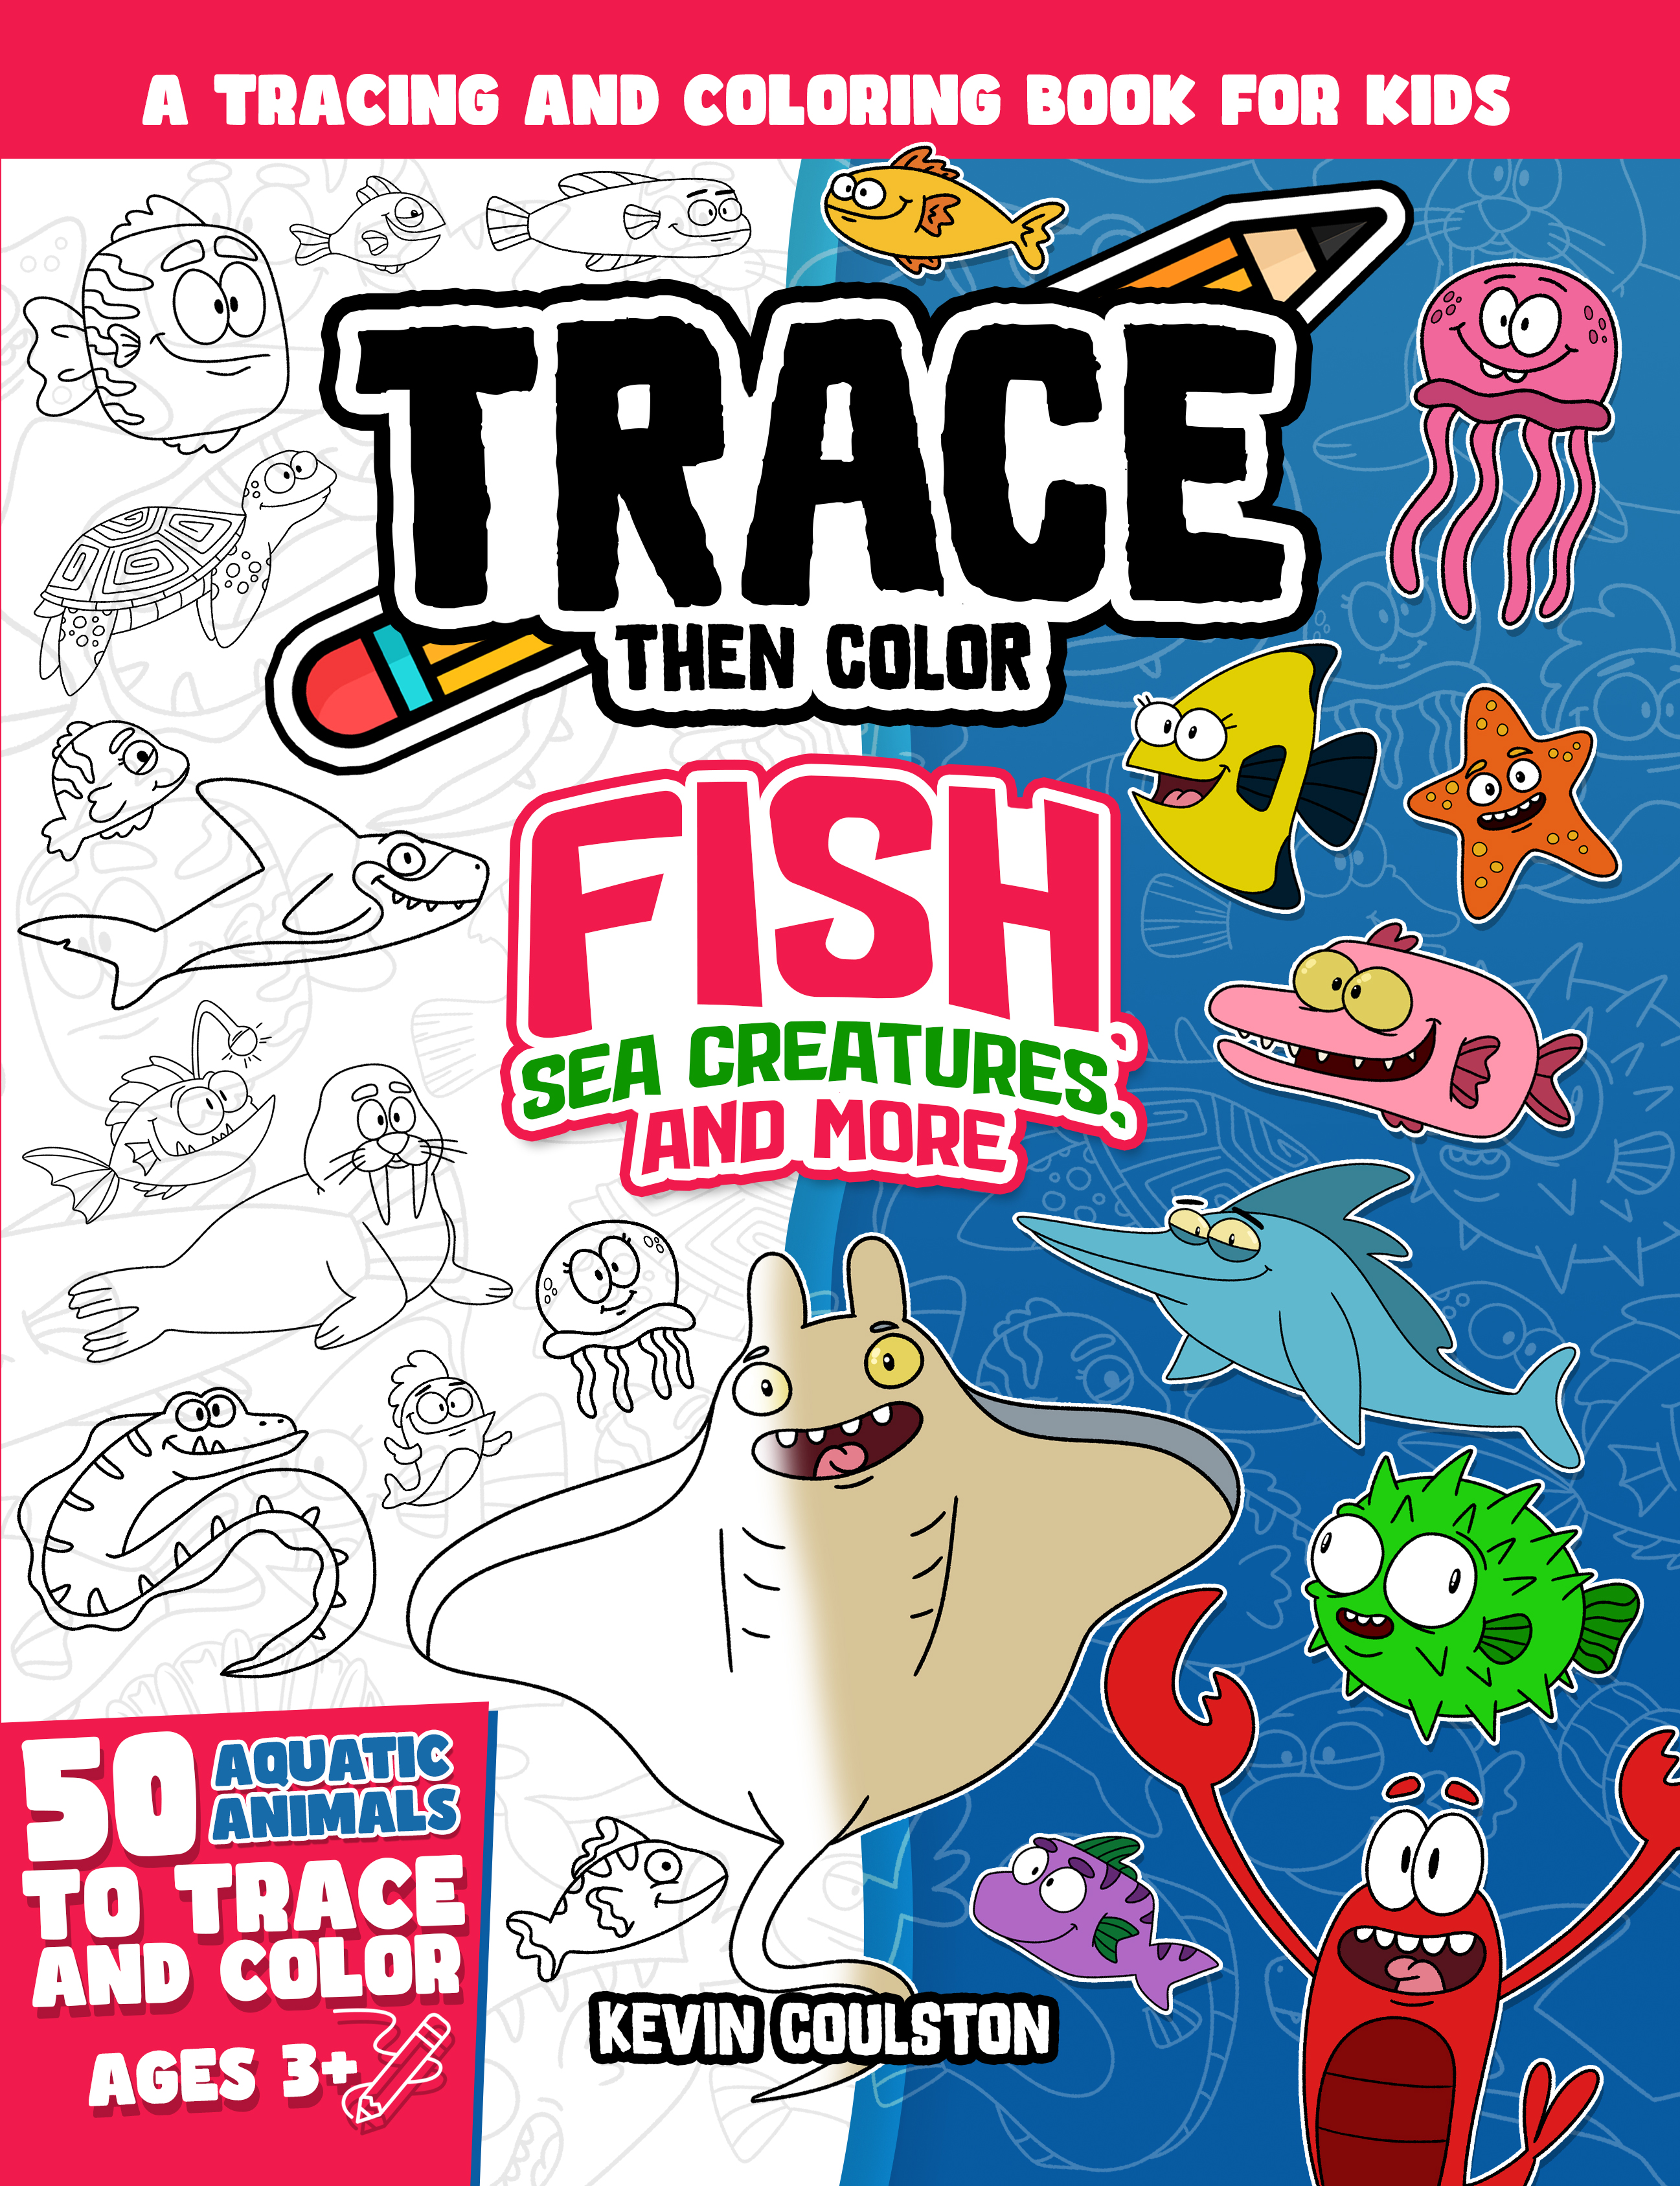 Trace Then Color: Fish, Sea Creatures, and More